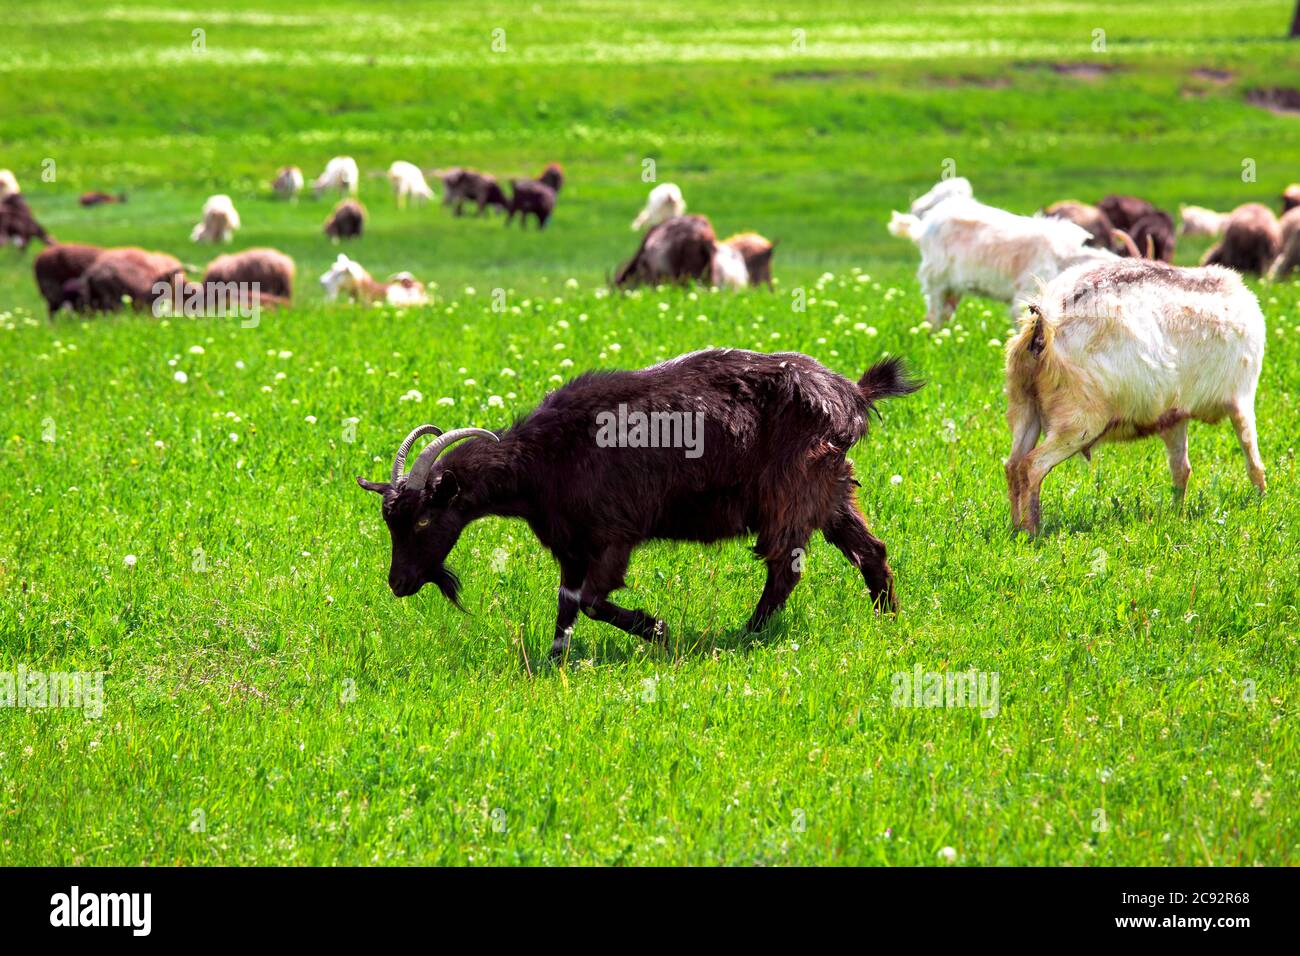 The black goat is grazed on a lawn, artiodactyls eats a green grass. Stock Photo